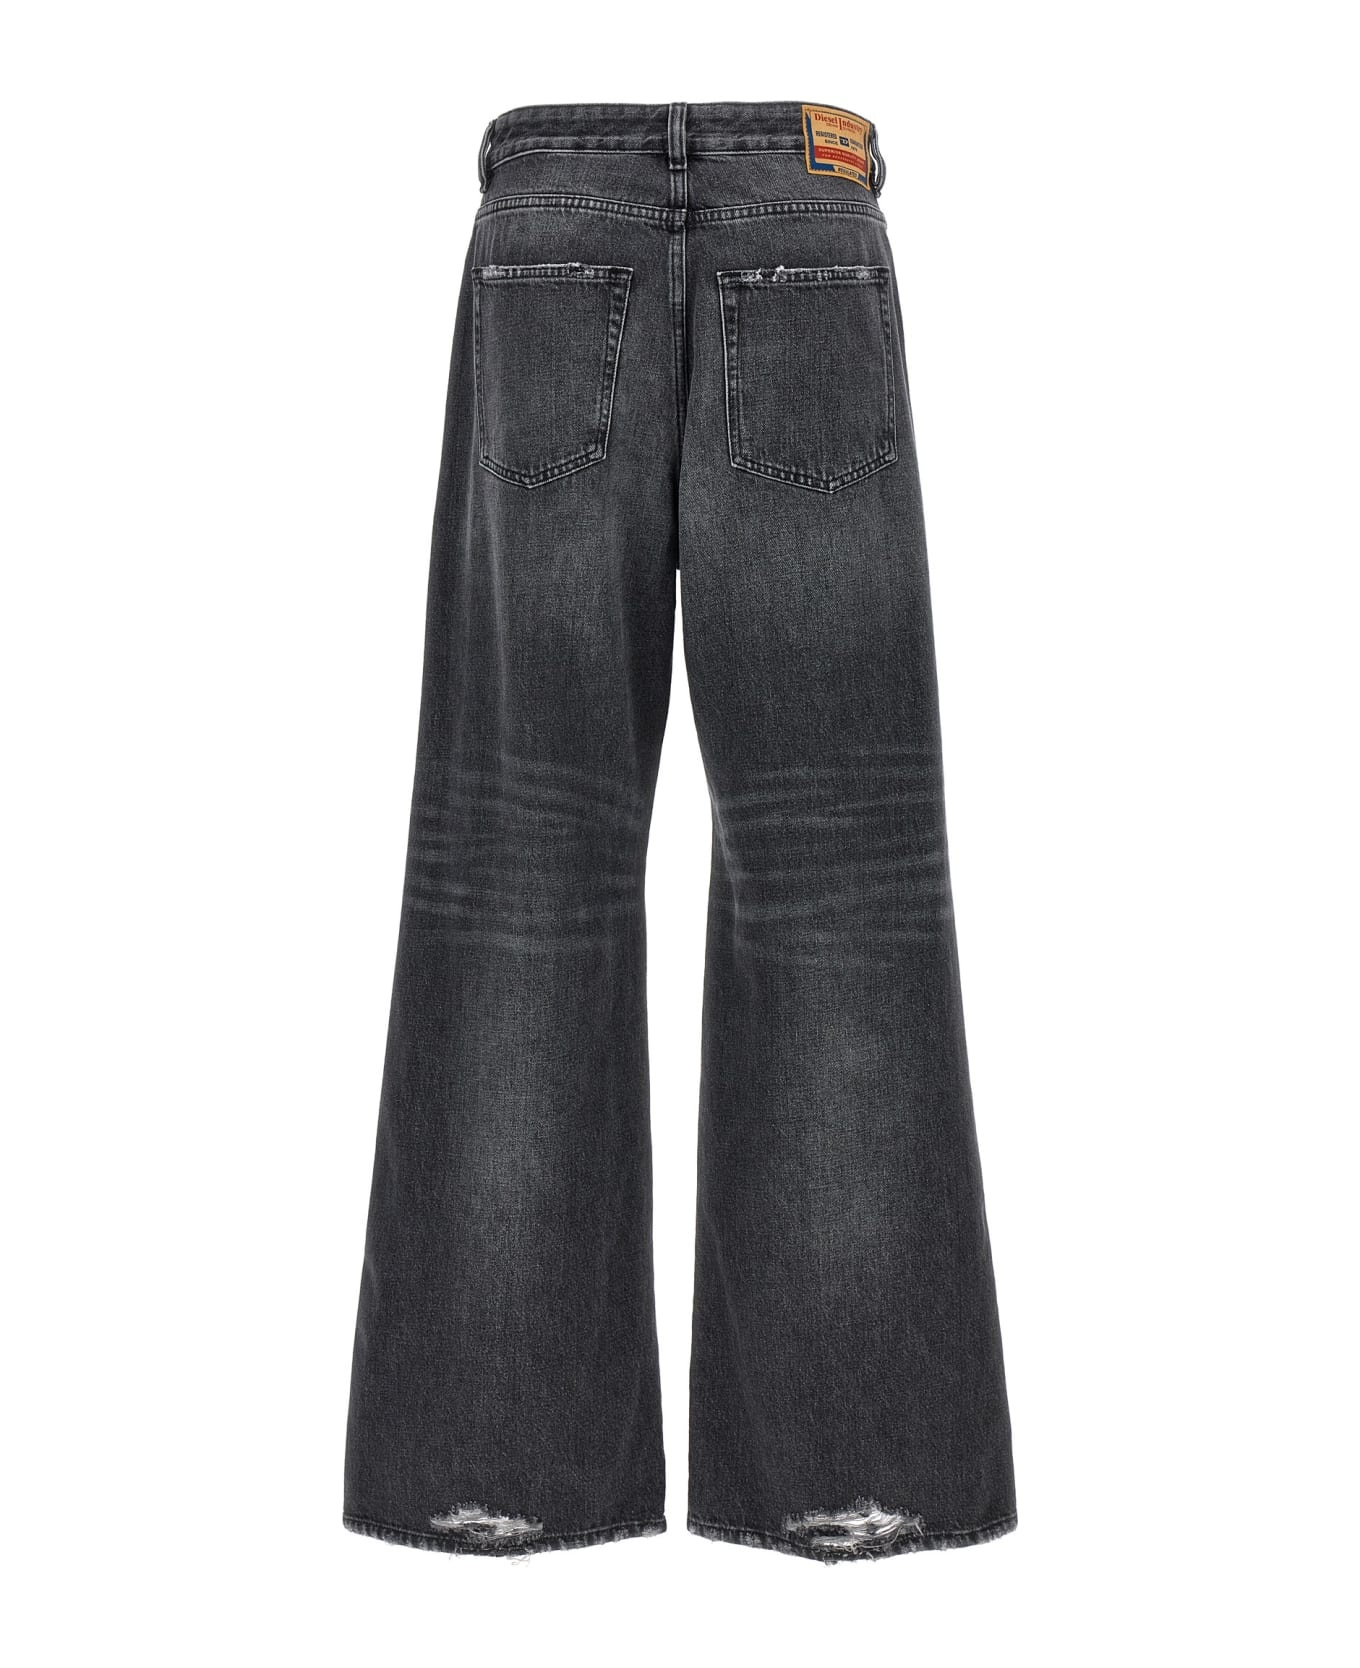 '1996 D-sire' Jeans - 2